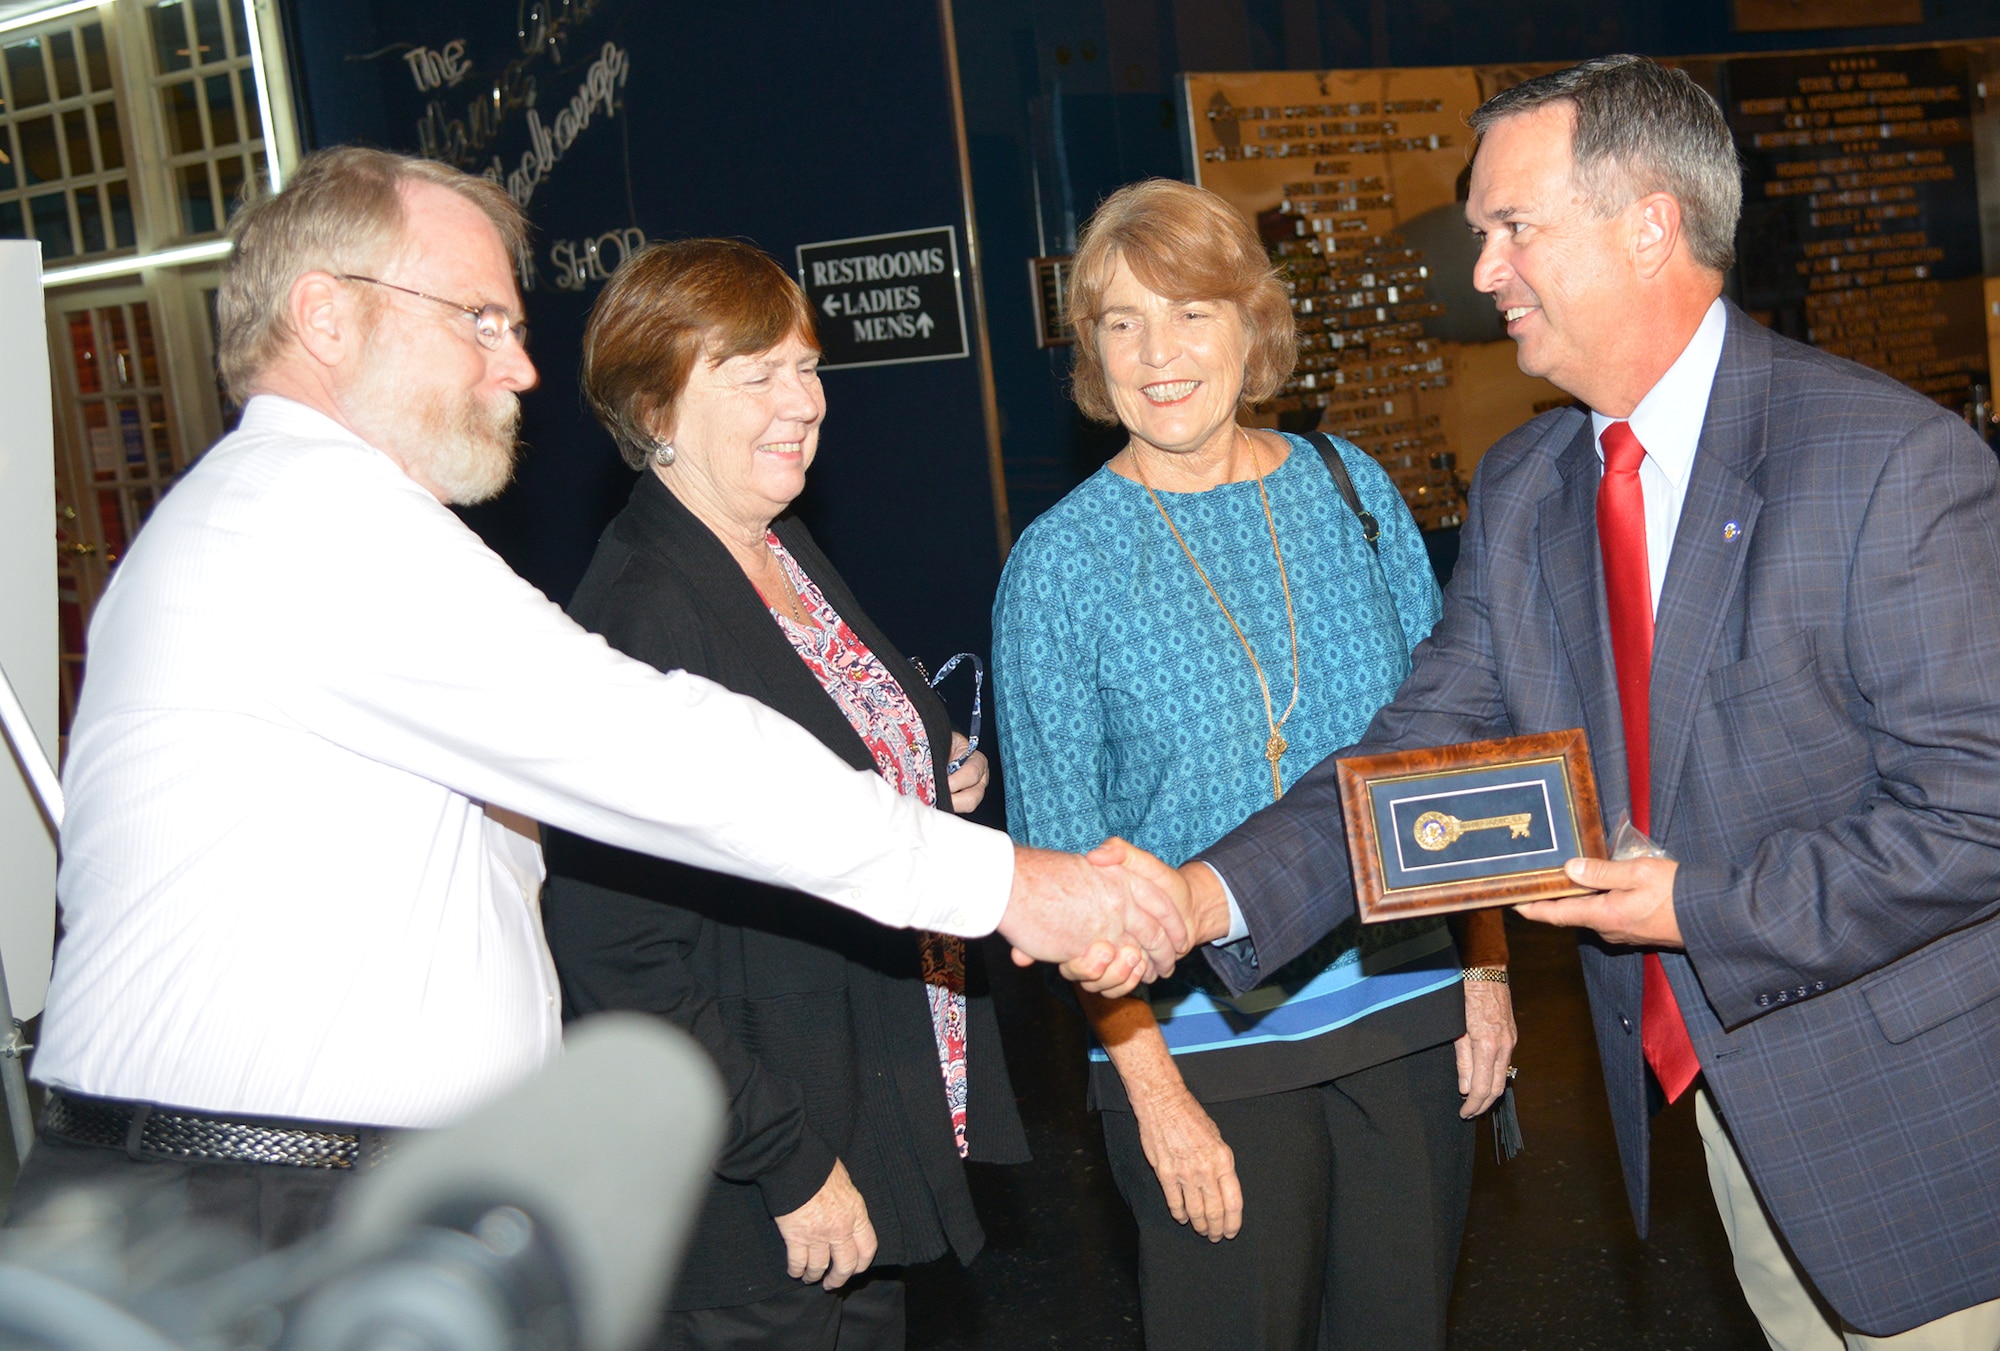 Warner Robins Mayor Randy Toms, right, shakes hands with Frank Guilfoyle as his sisters, Jane Guilfoyle Ward and Anne Guilfoyle Charlton, look on. The siblings are the grandchildren of Gen. Augustine Warner Robins, who both the town and the base are named after. Toms presented them with the key to the city. (U.S. Air Force photo by Ray Crayton)